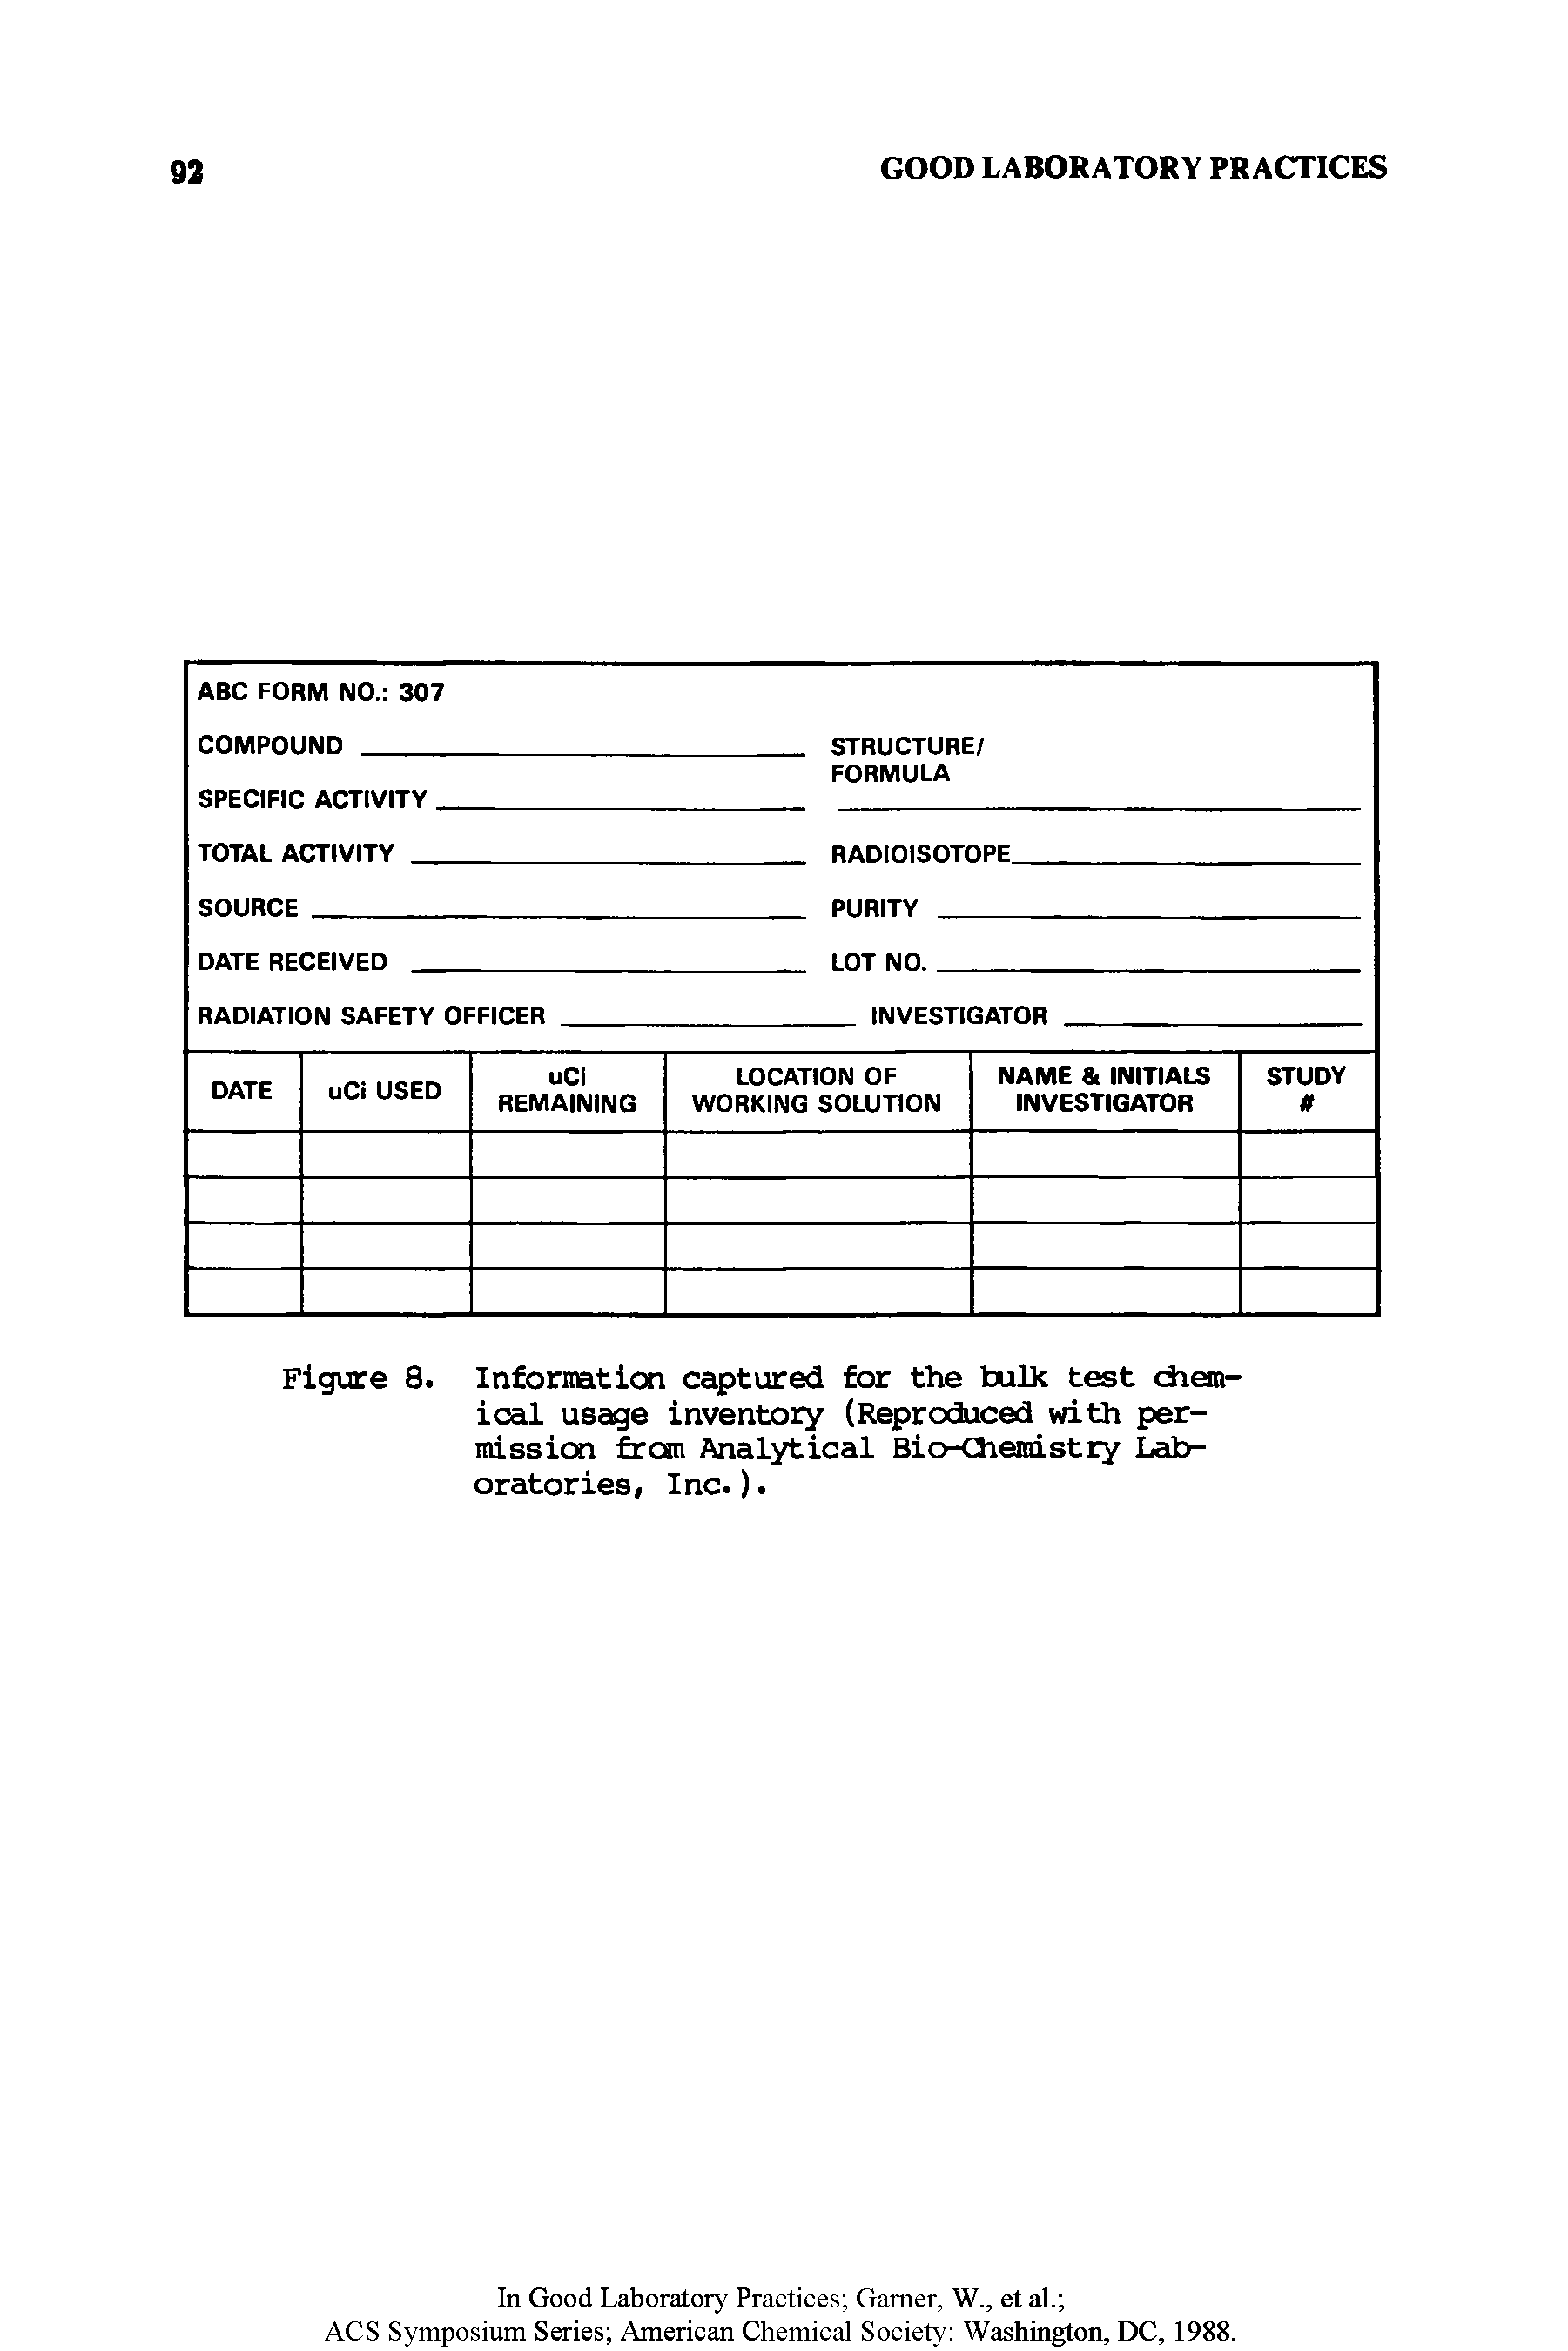 Figure 8. Information captured for the bulk test chemical usage inventory (Reproduced with permission from Analytical Bio-Chemistry Laboratories, Inc.).